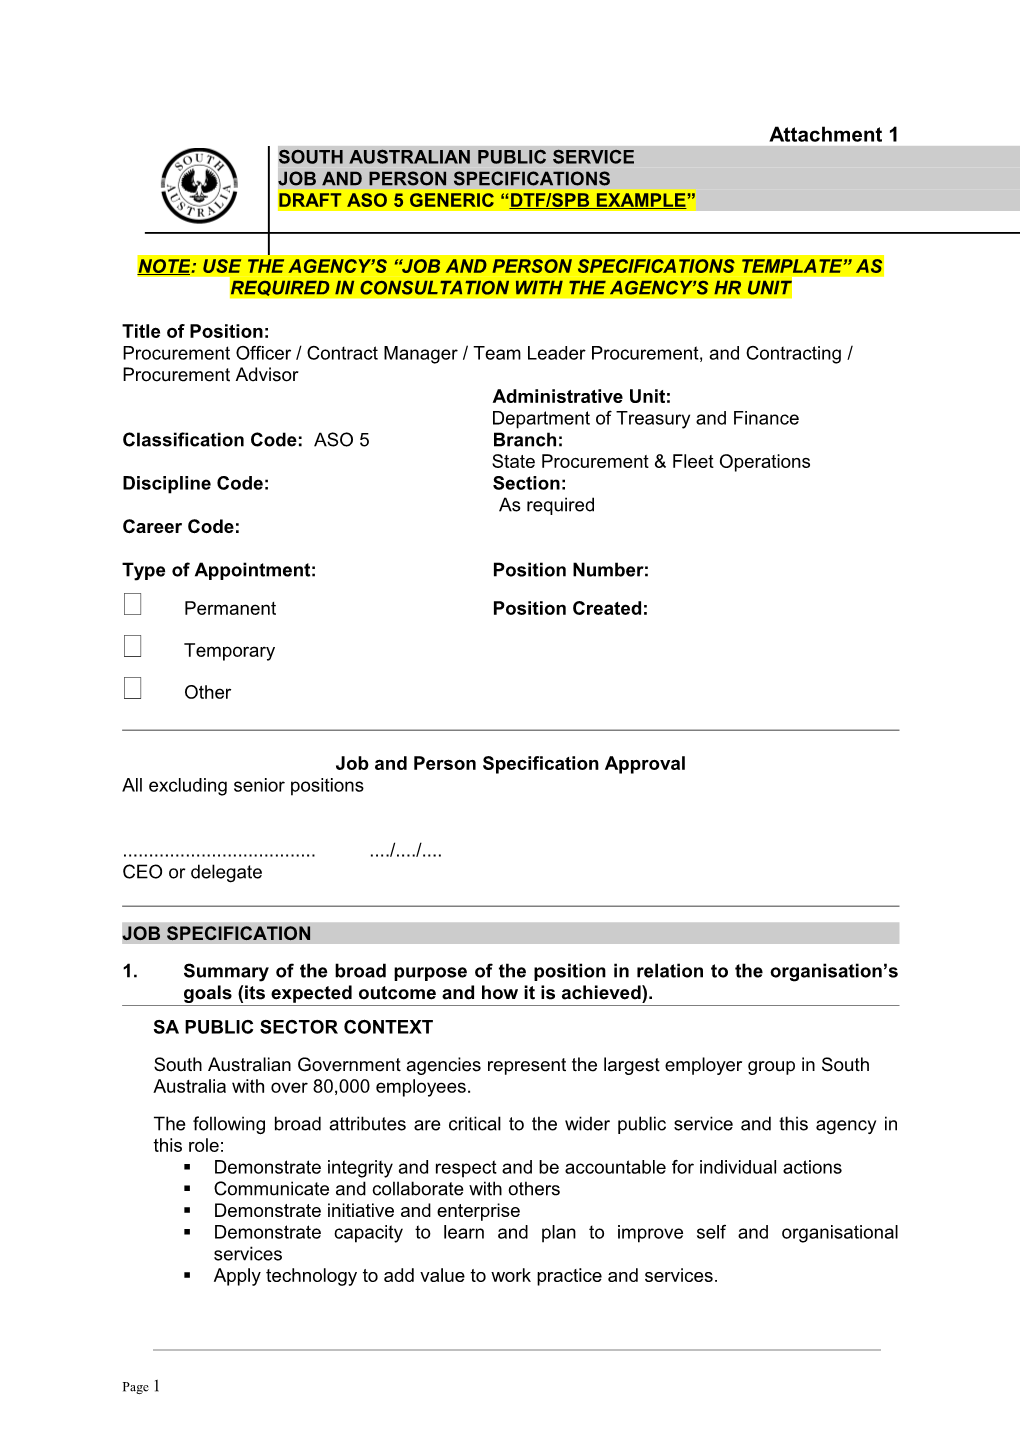 Job and Person Specification Template